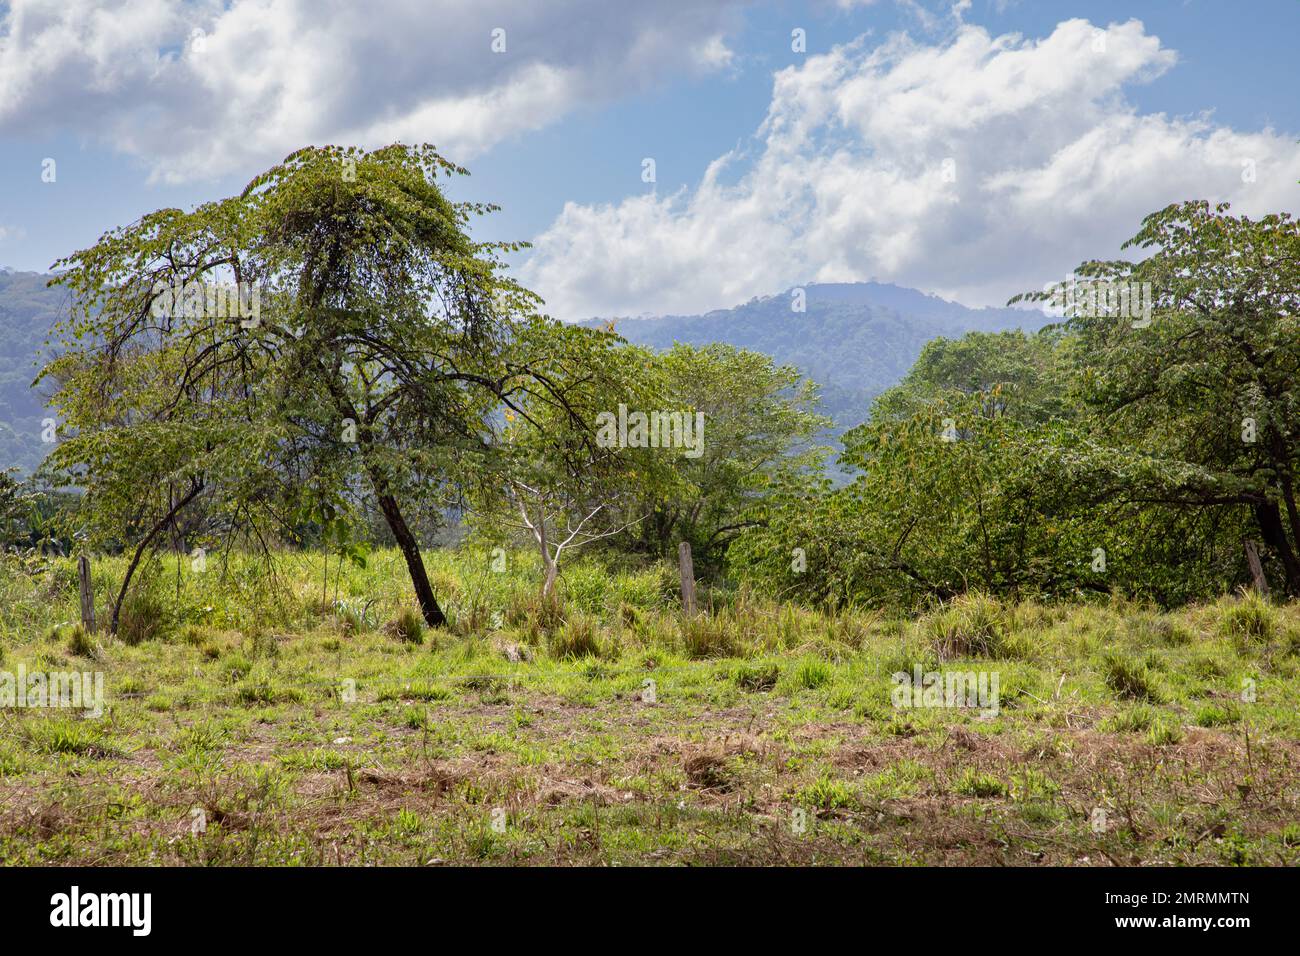 Lush vegetation and landscape of Central Pacific region of Costa Rica Stock Photo